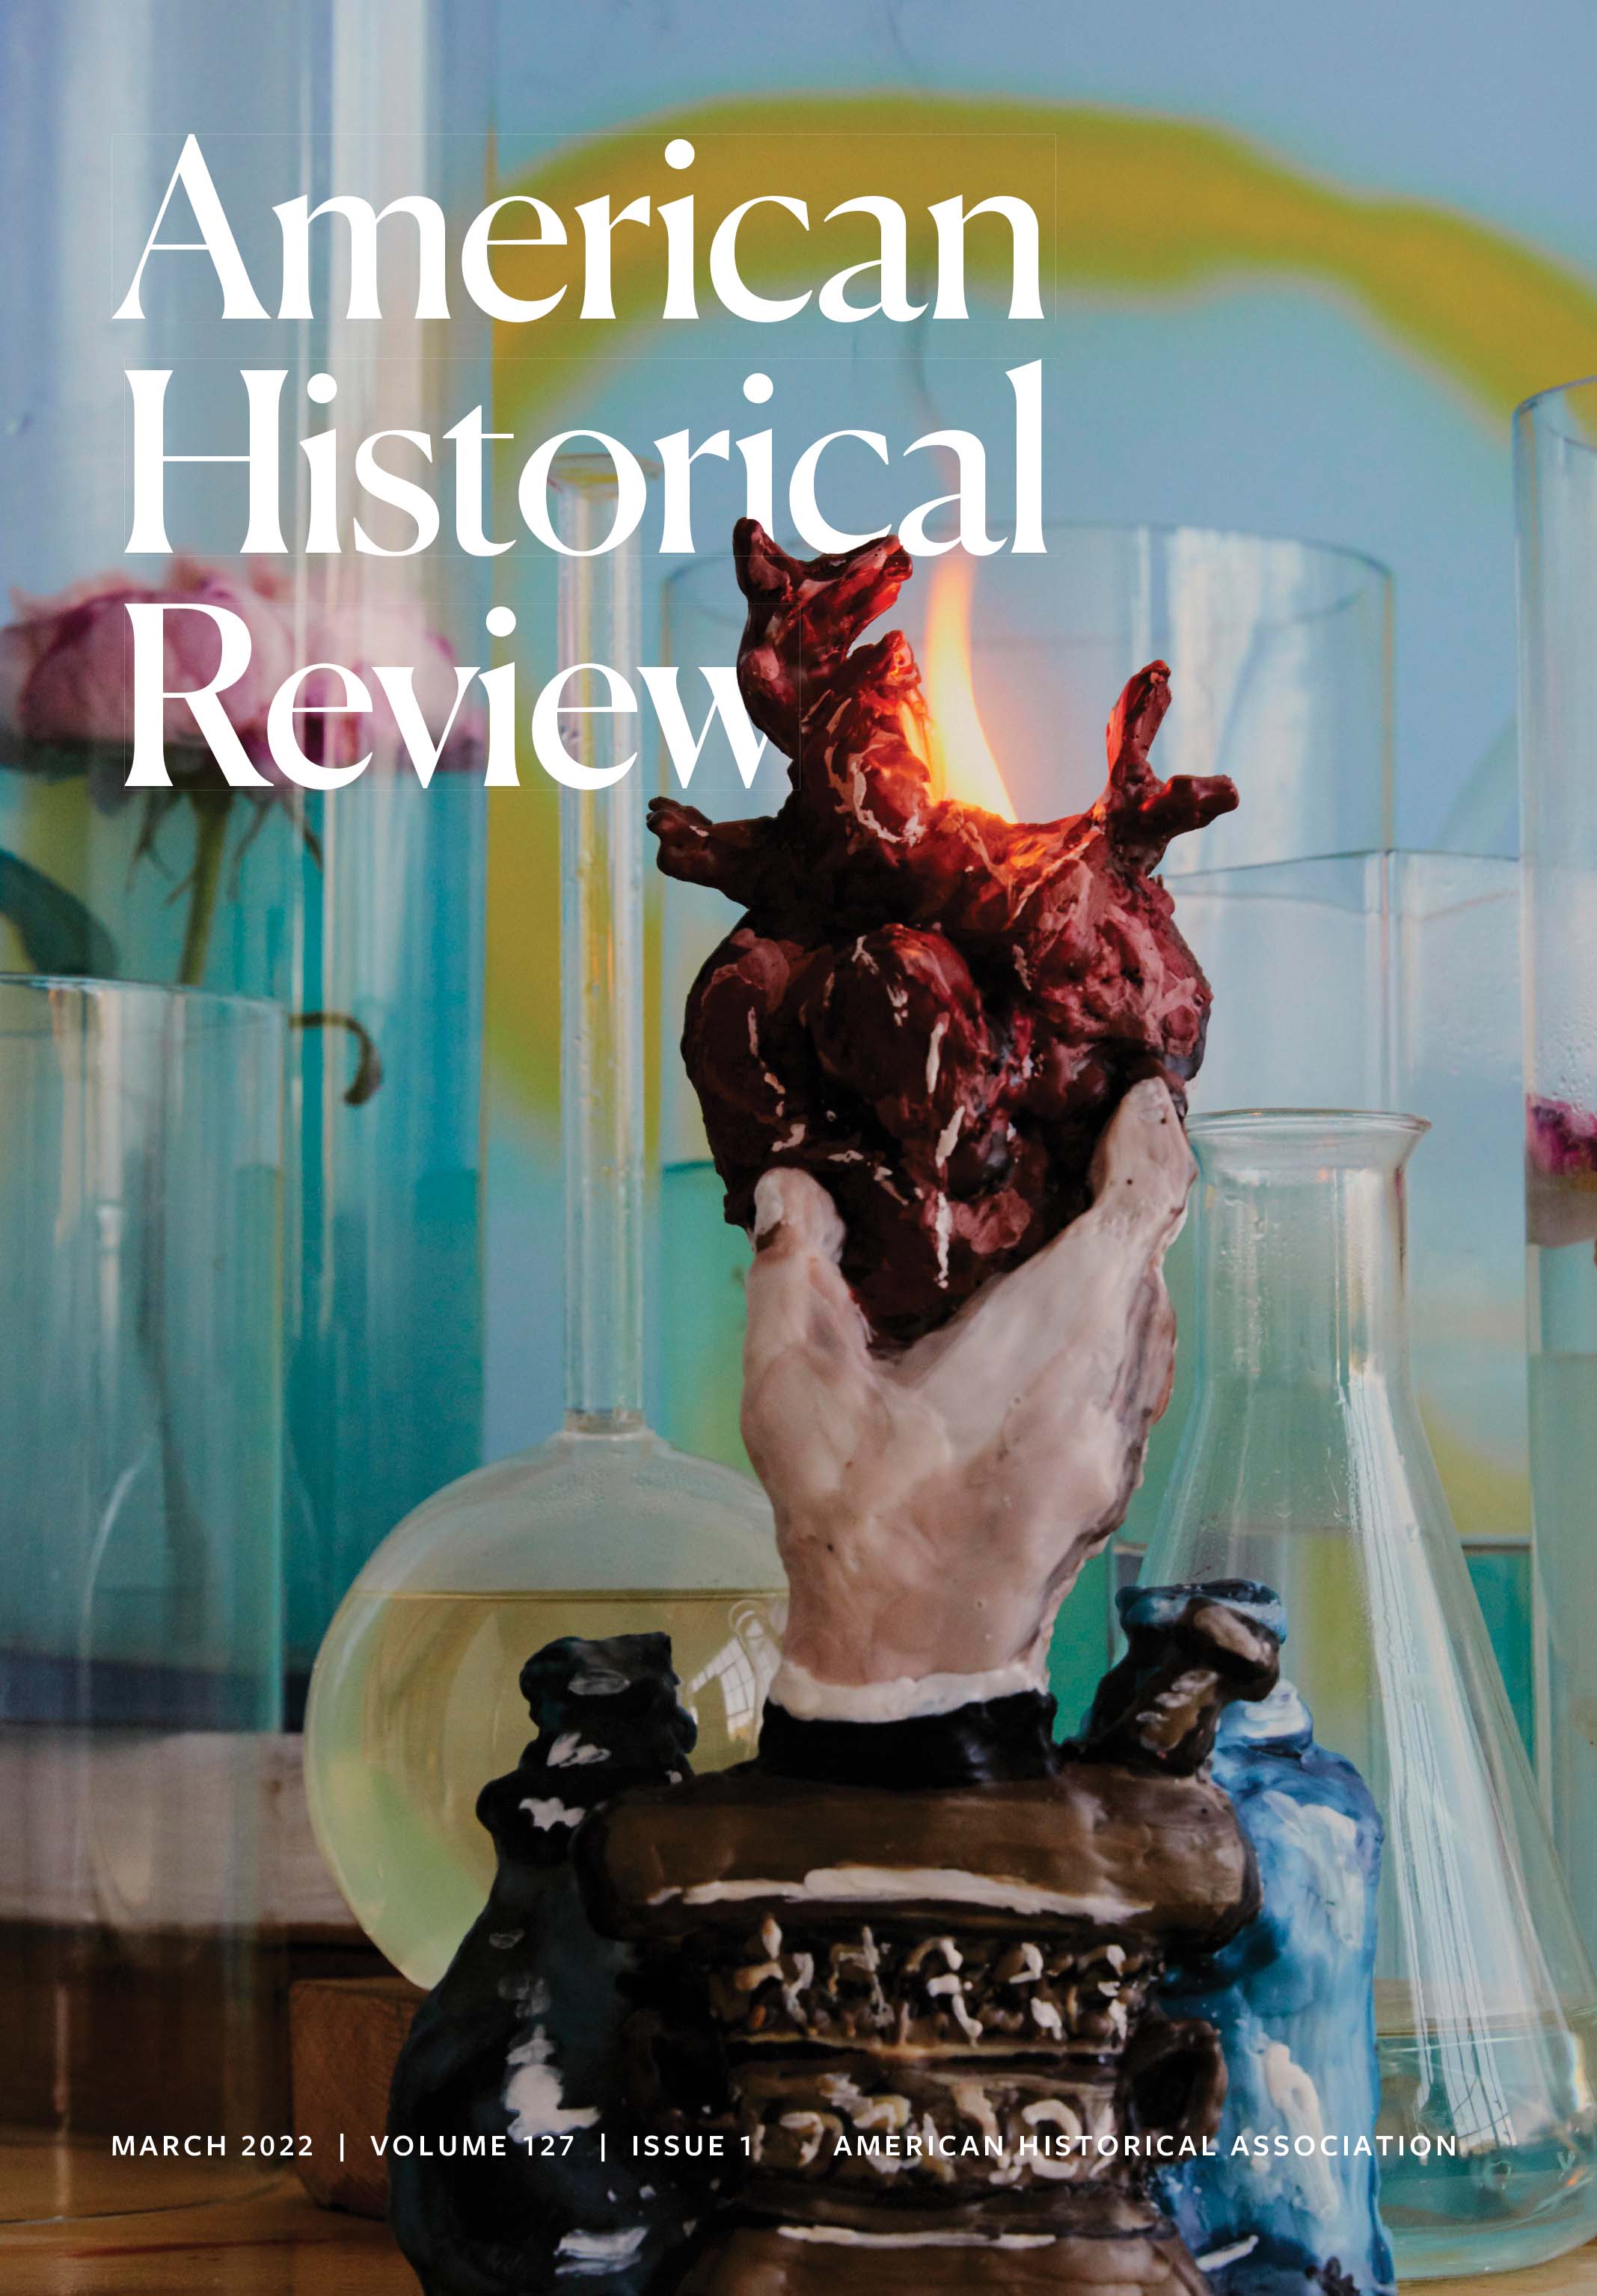 Cover of the March 2022 issue of the American Historical Review